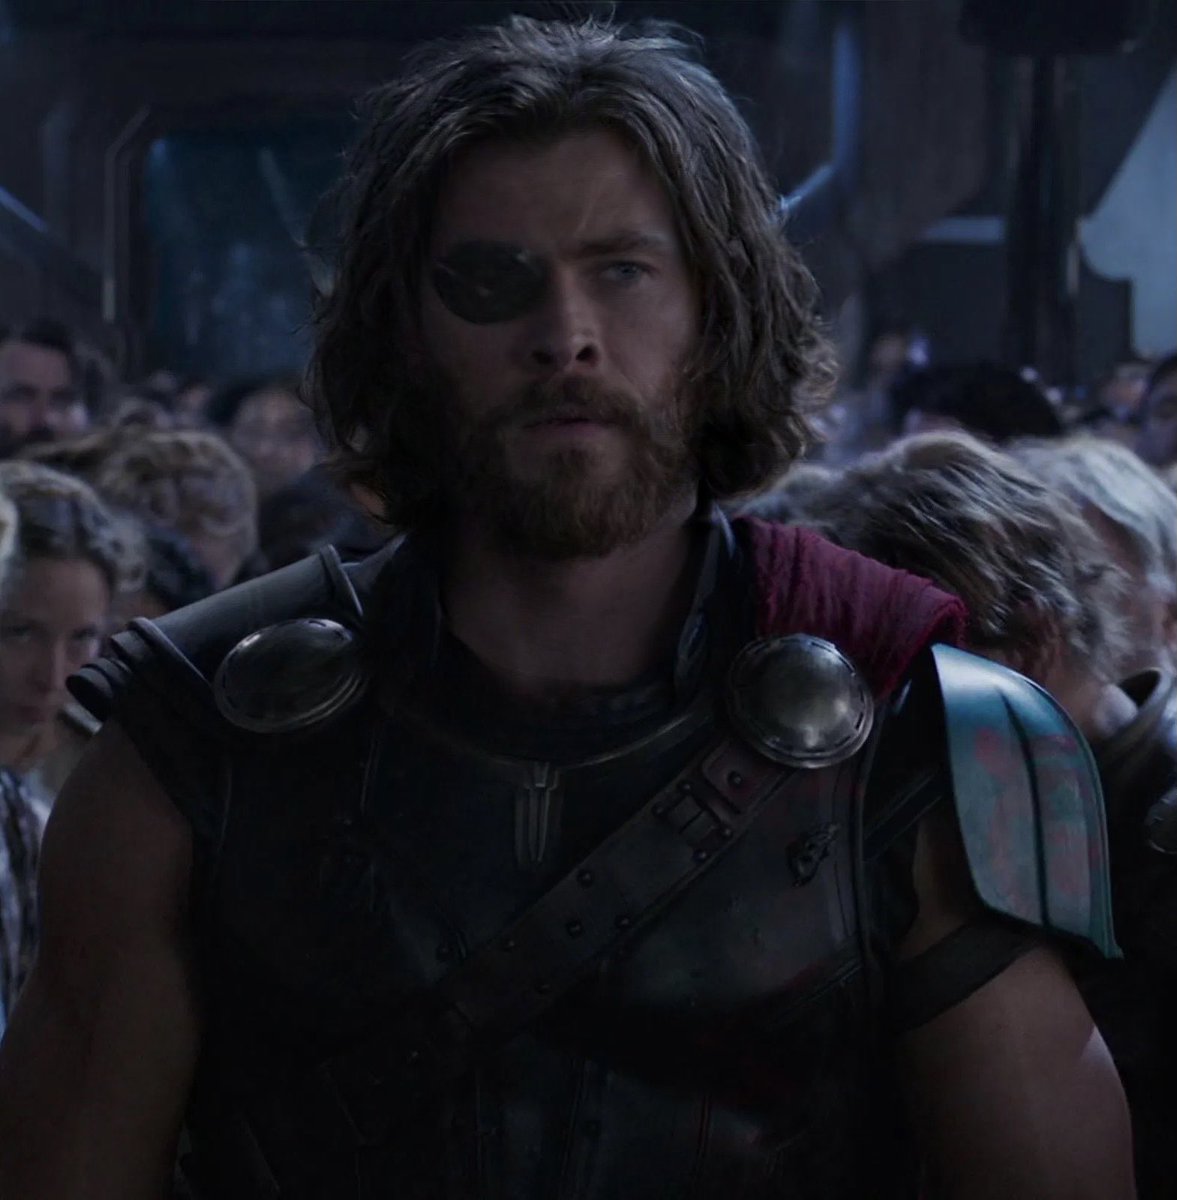 RT @heimdallstan: finally i get to see thor in the awkward stages of growing his hair out ;-; https://t.co/lQzzrMpivu